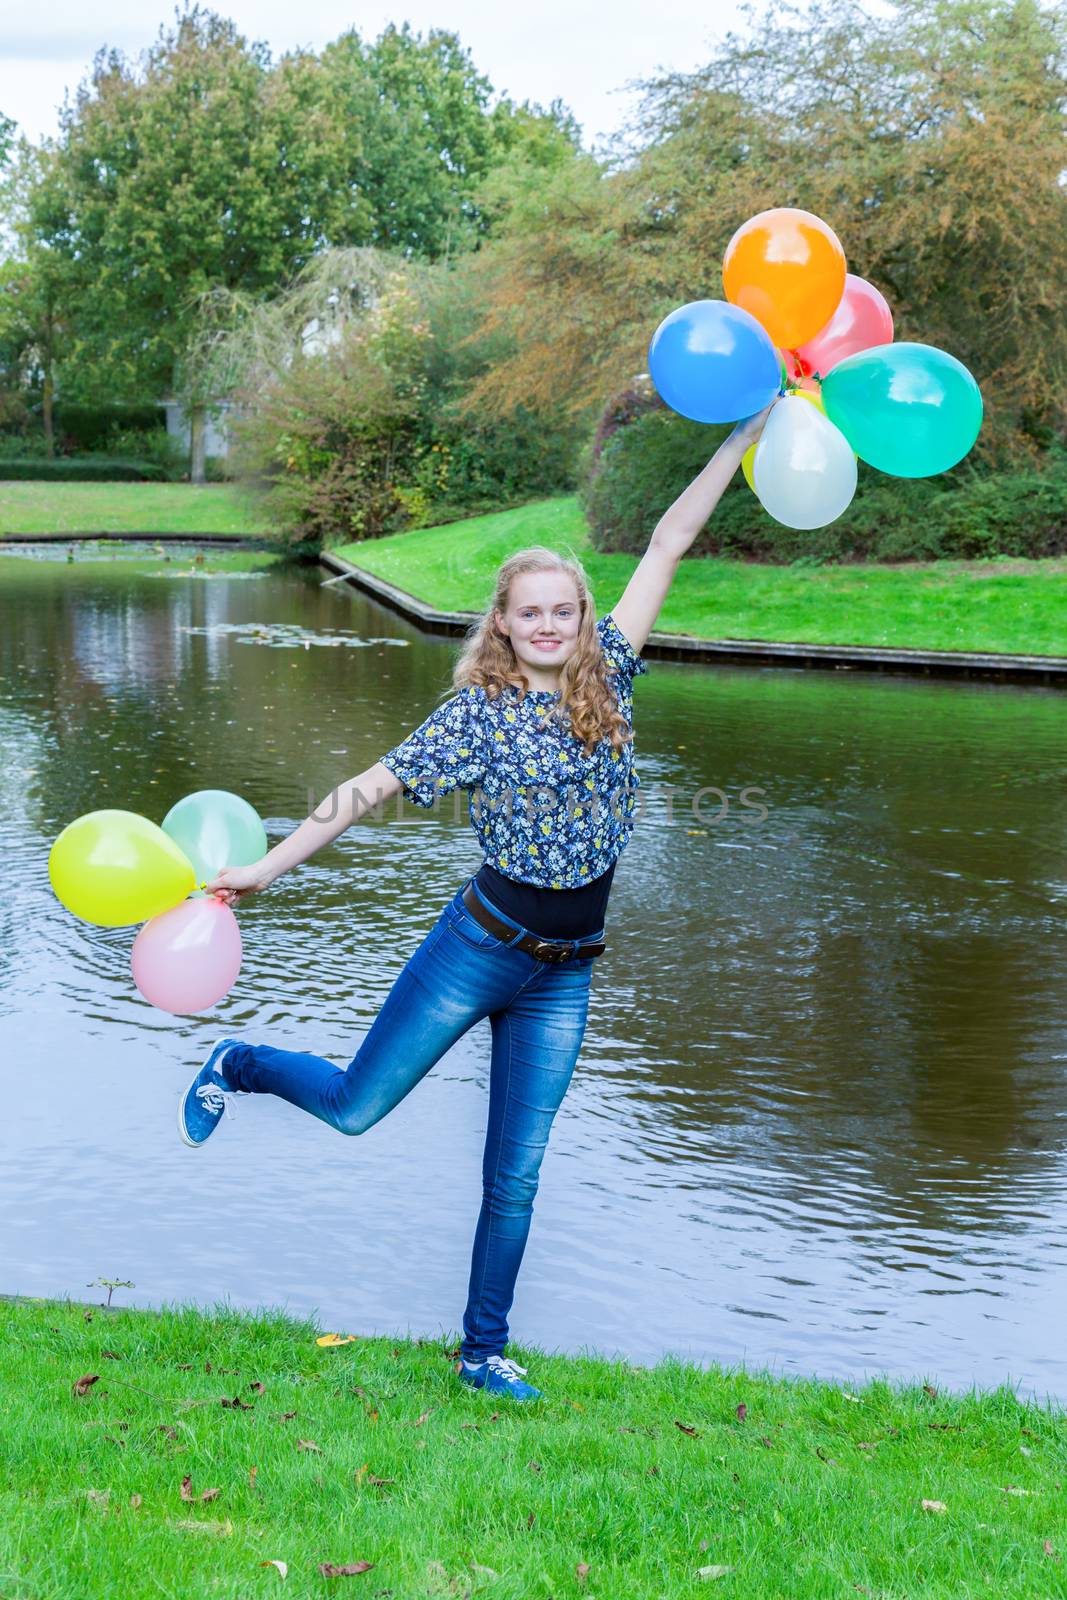 Girl standing at pond with colored balloons by BenSchonewille